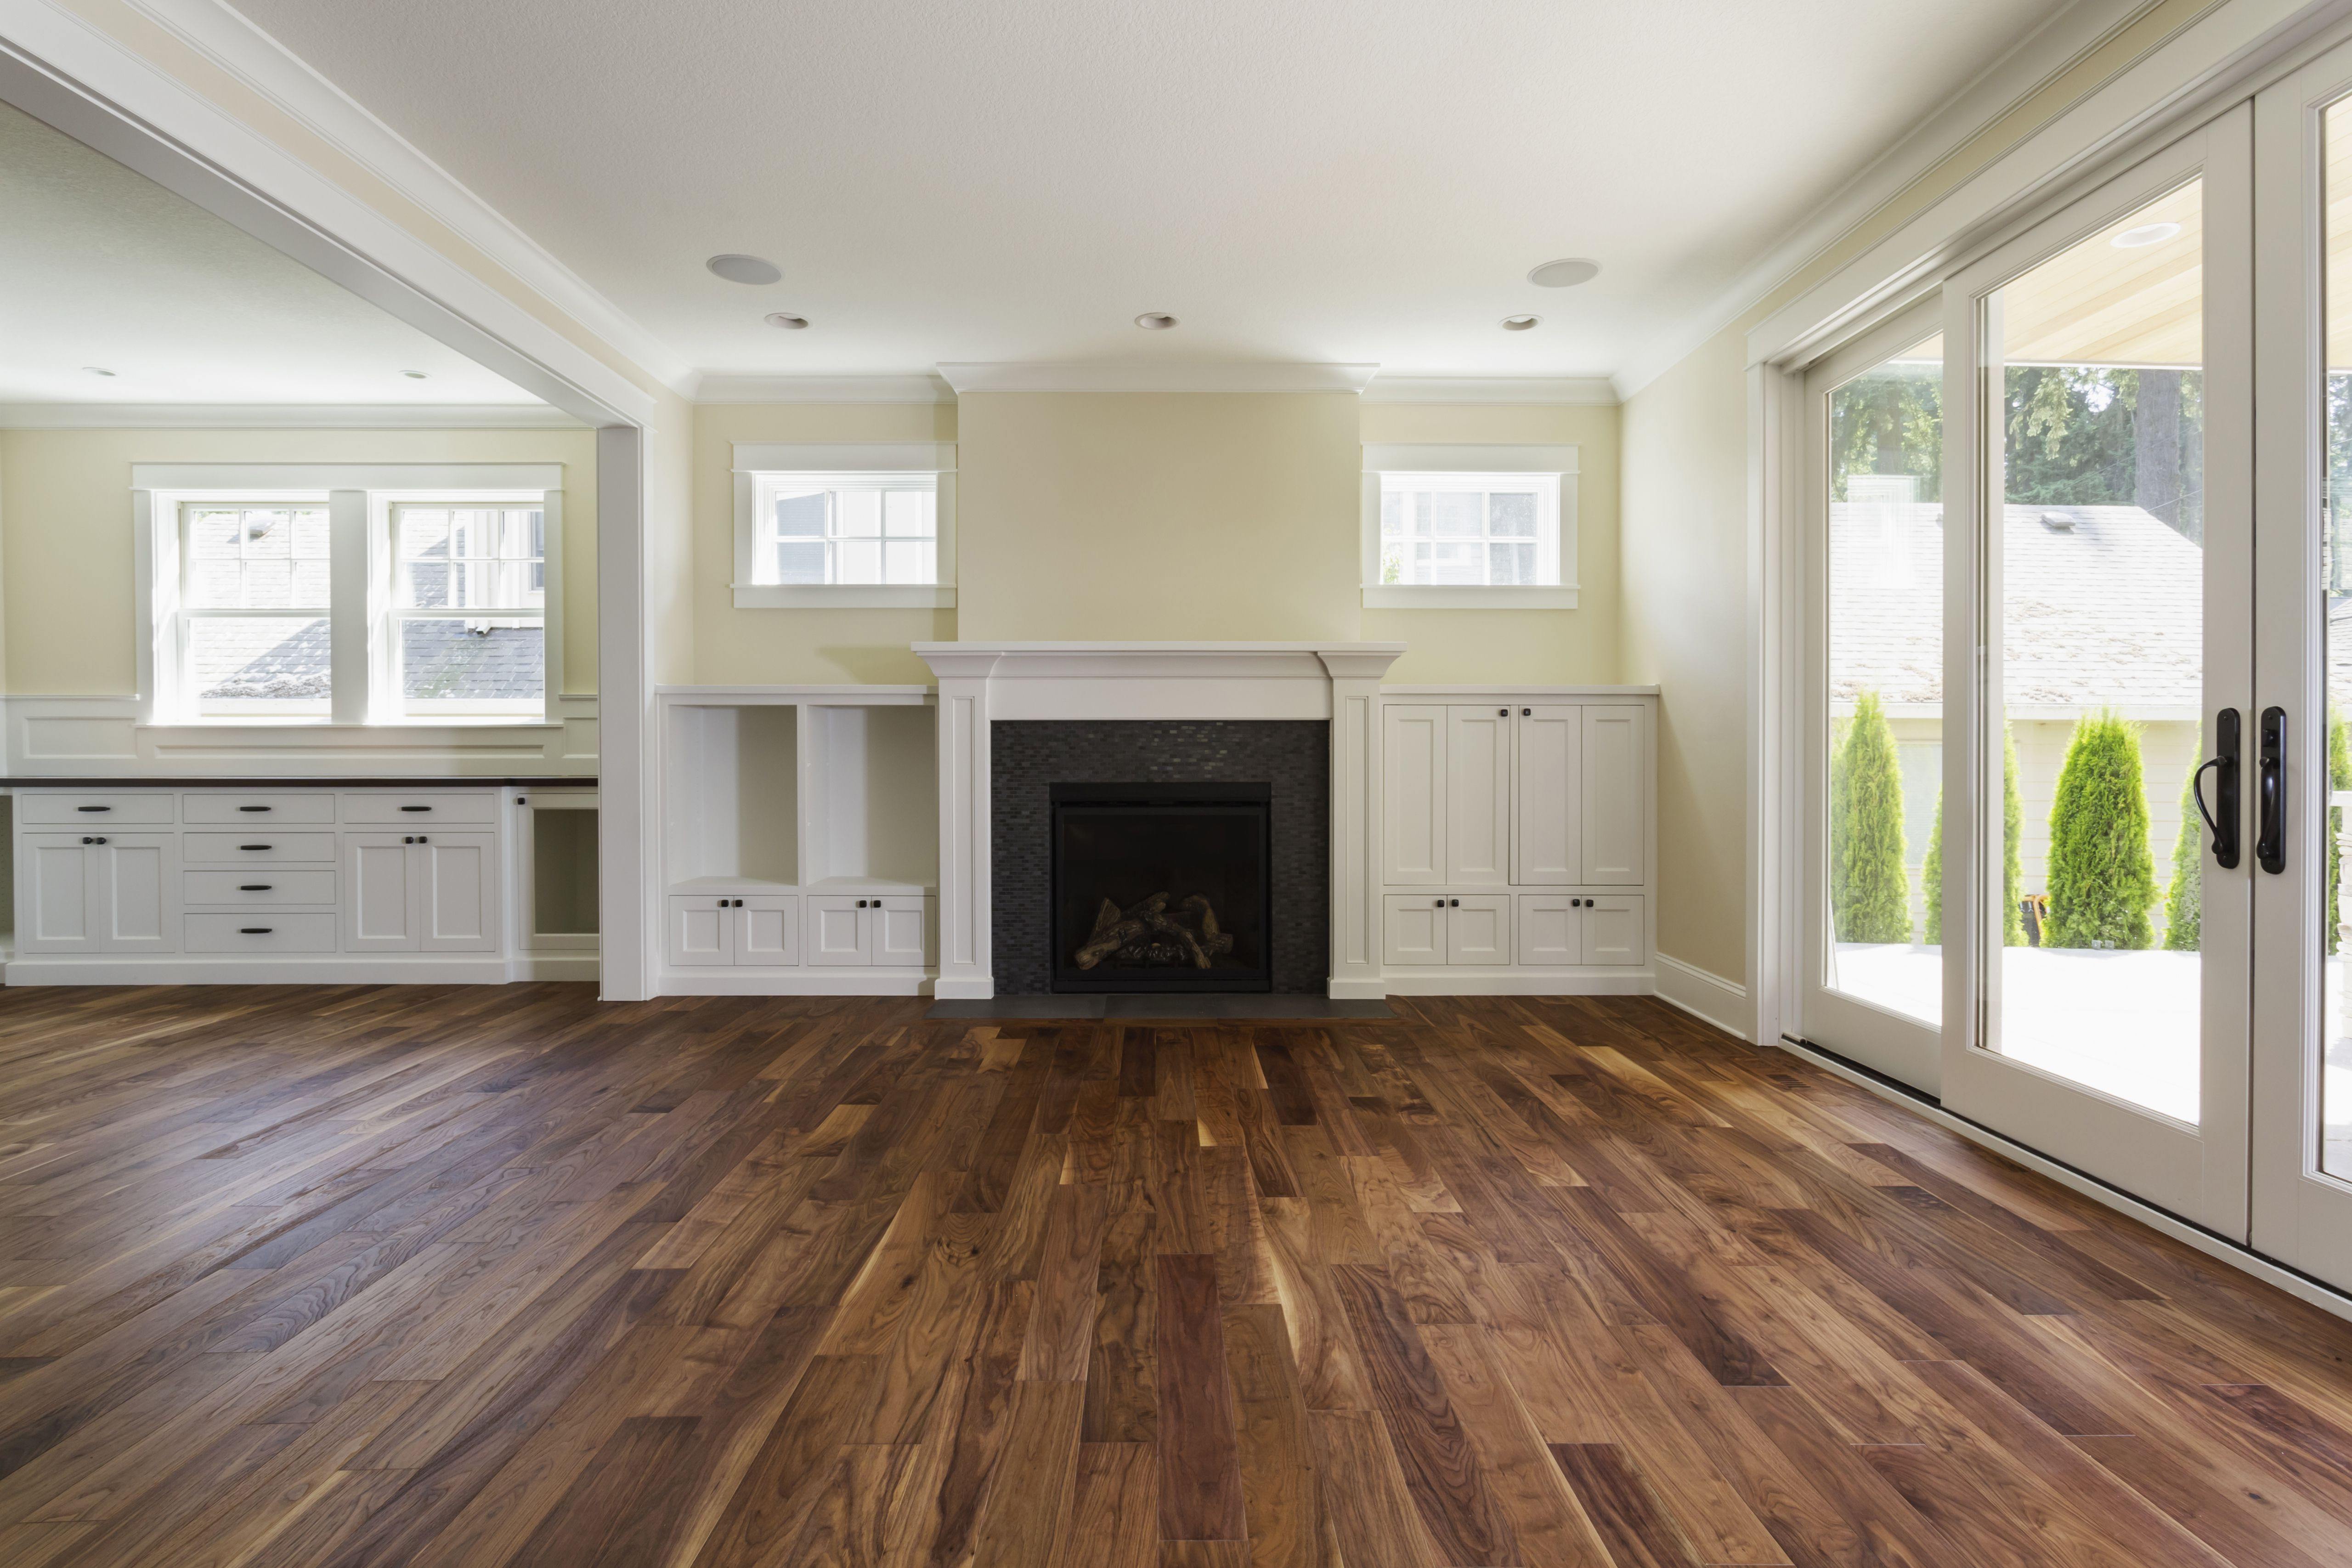 10 Fantastic What Does Hardwood Flooring Cost Per Square Foot 2024 free download what does hardwood flooring cost per square foot of the pros and cons of prefinished hardwood flooring throughout fireplace and built in shelves in living room 482143011 57bef8e33df78cc16e03